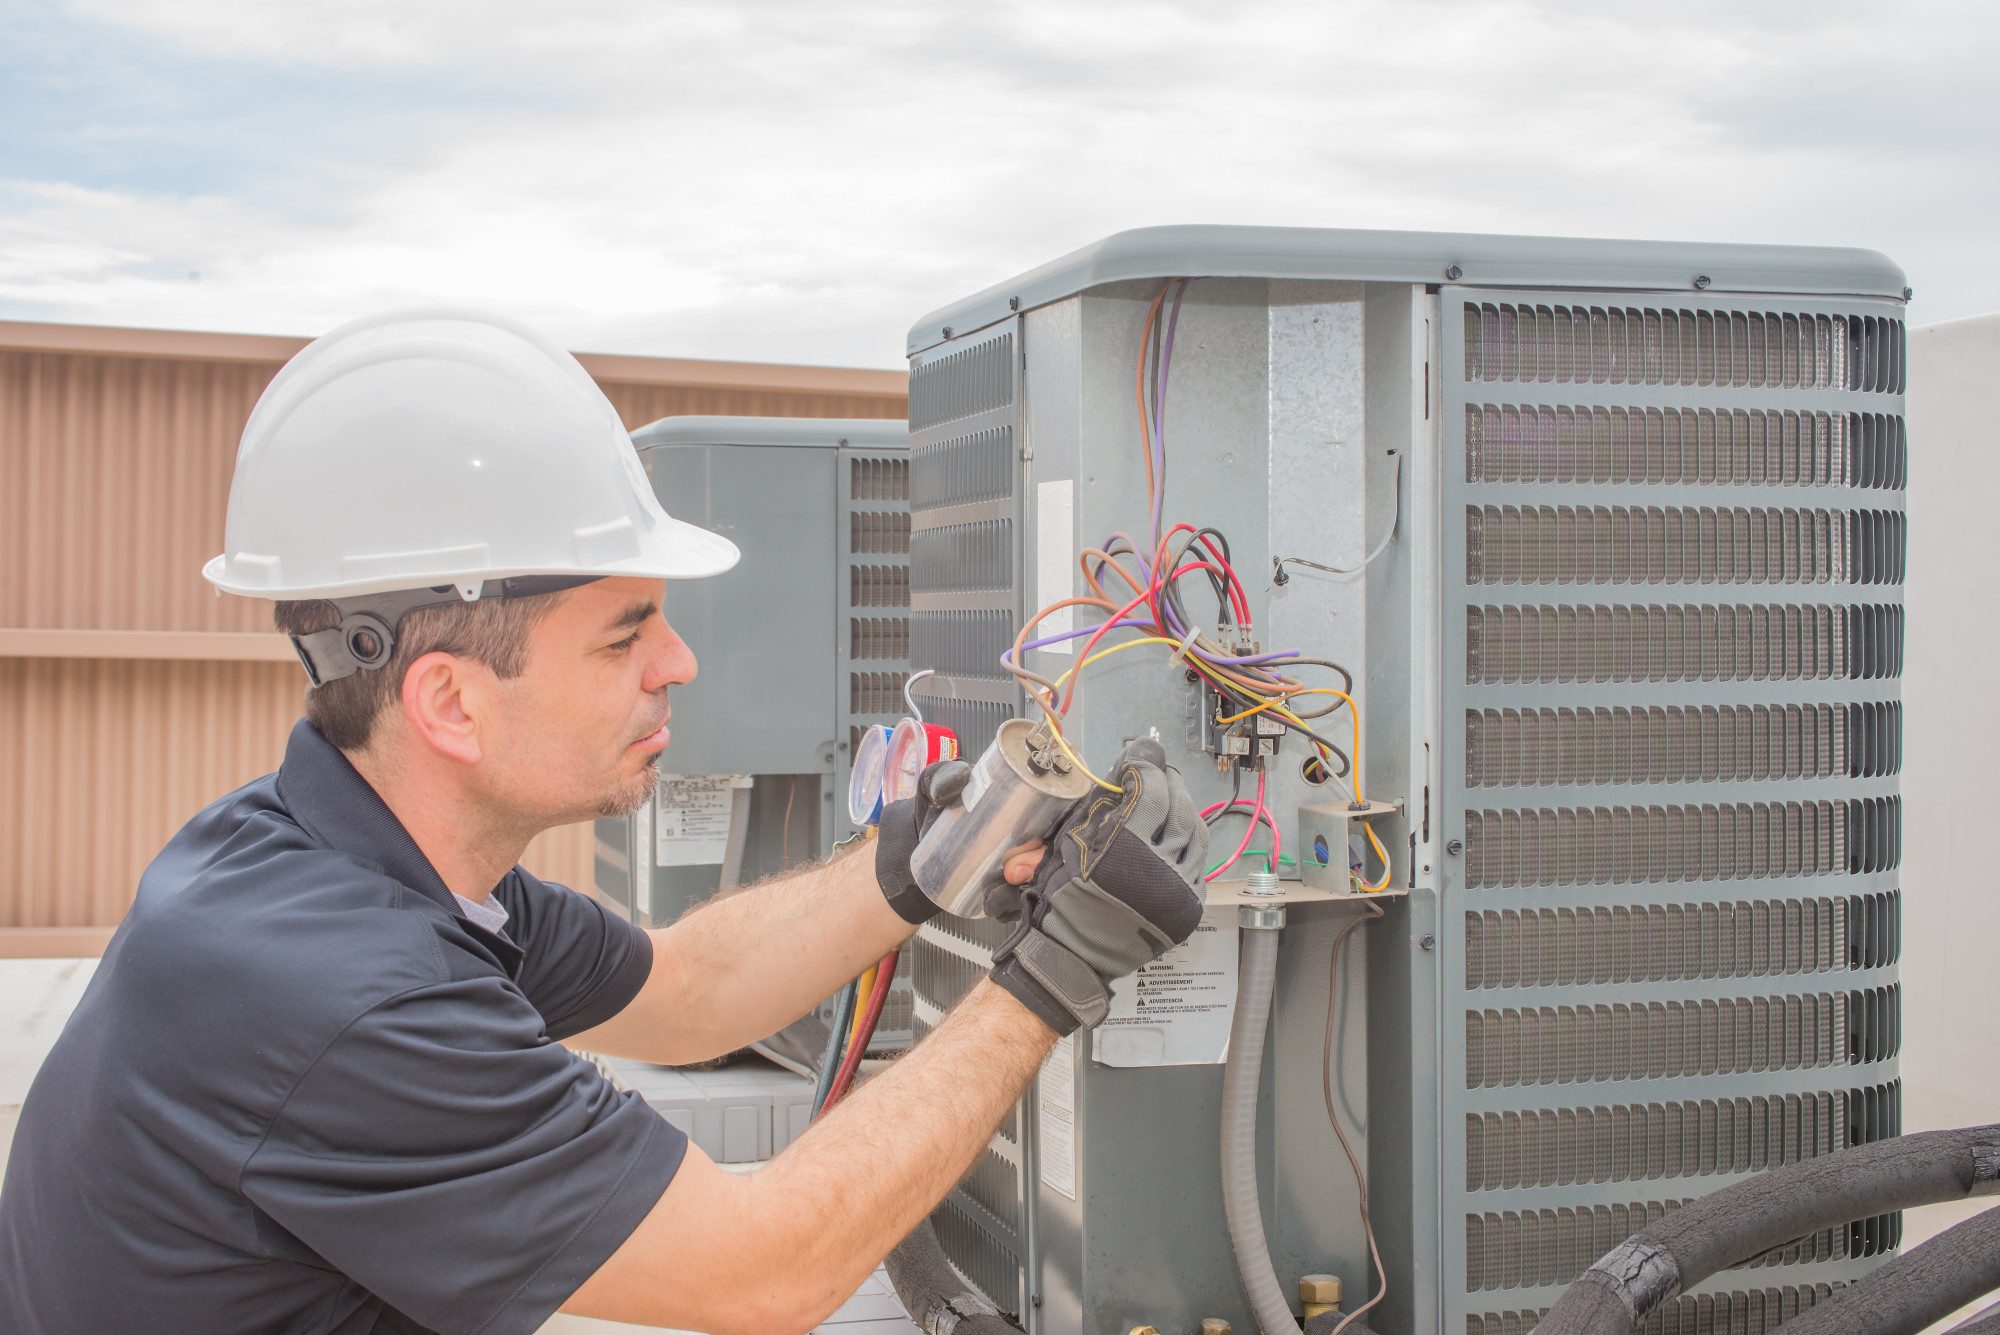 Air Conditioning Repair: How to Troubleshoot Common Problems